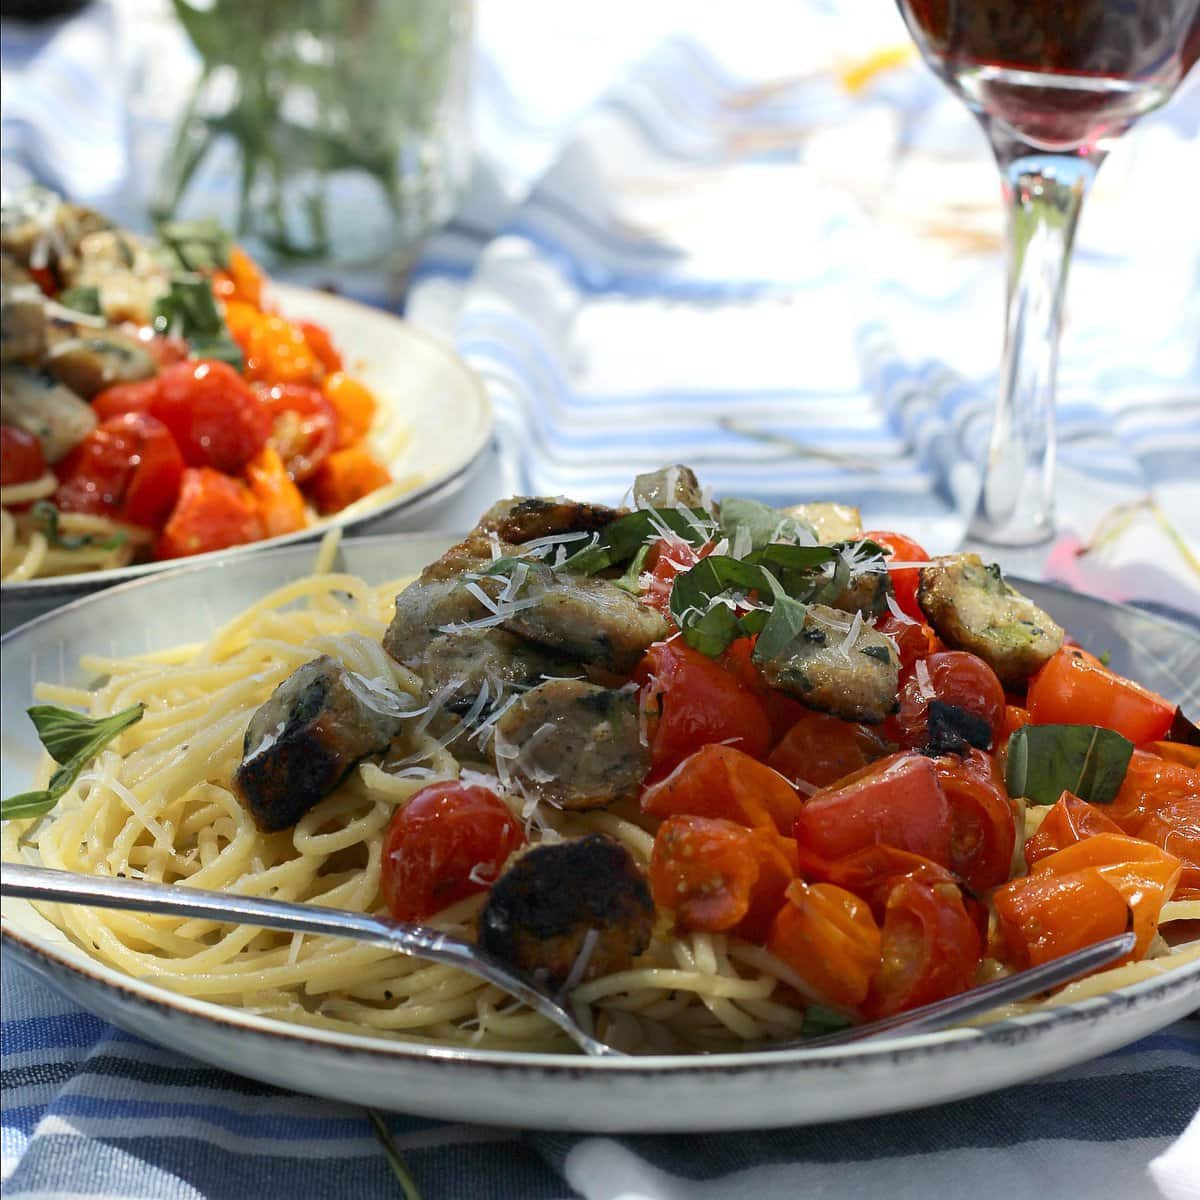 Outdoor table with a plate of pasta and tomatoes.